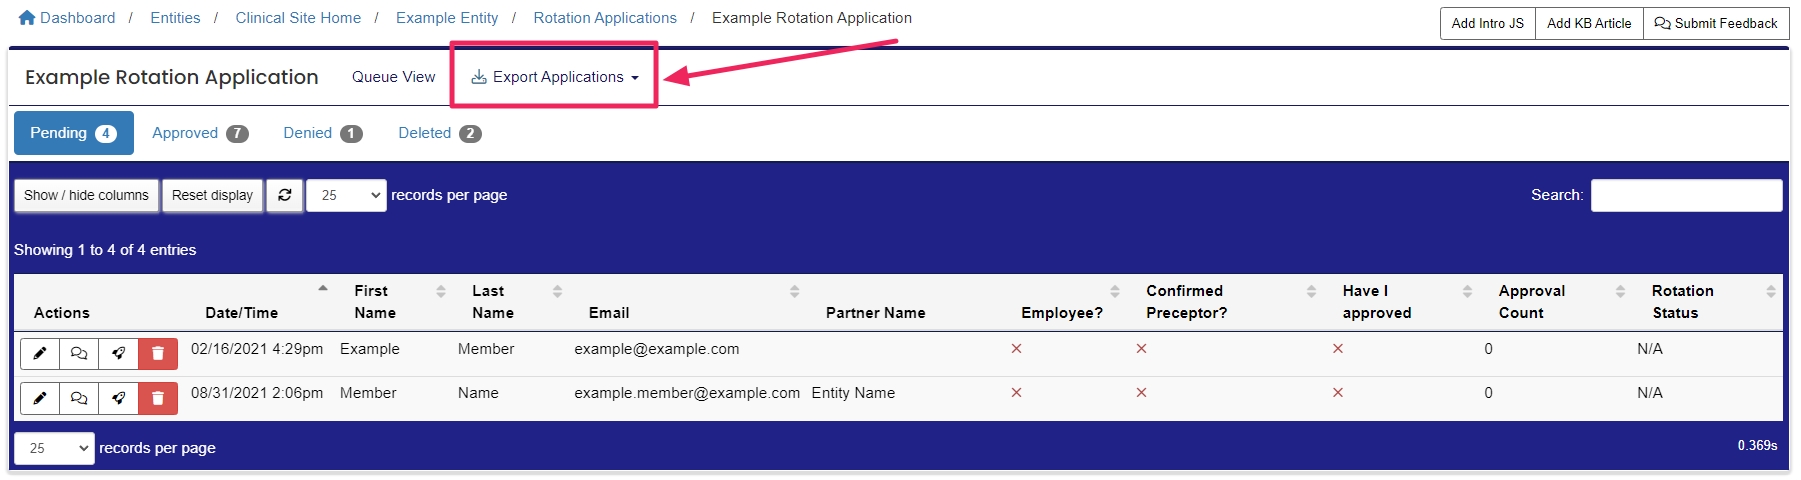 image Application List table highlighting Export Applications button